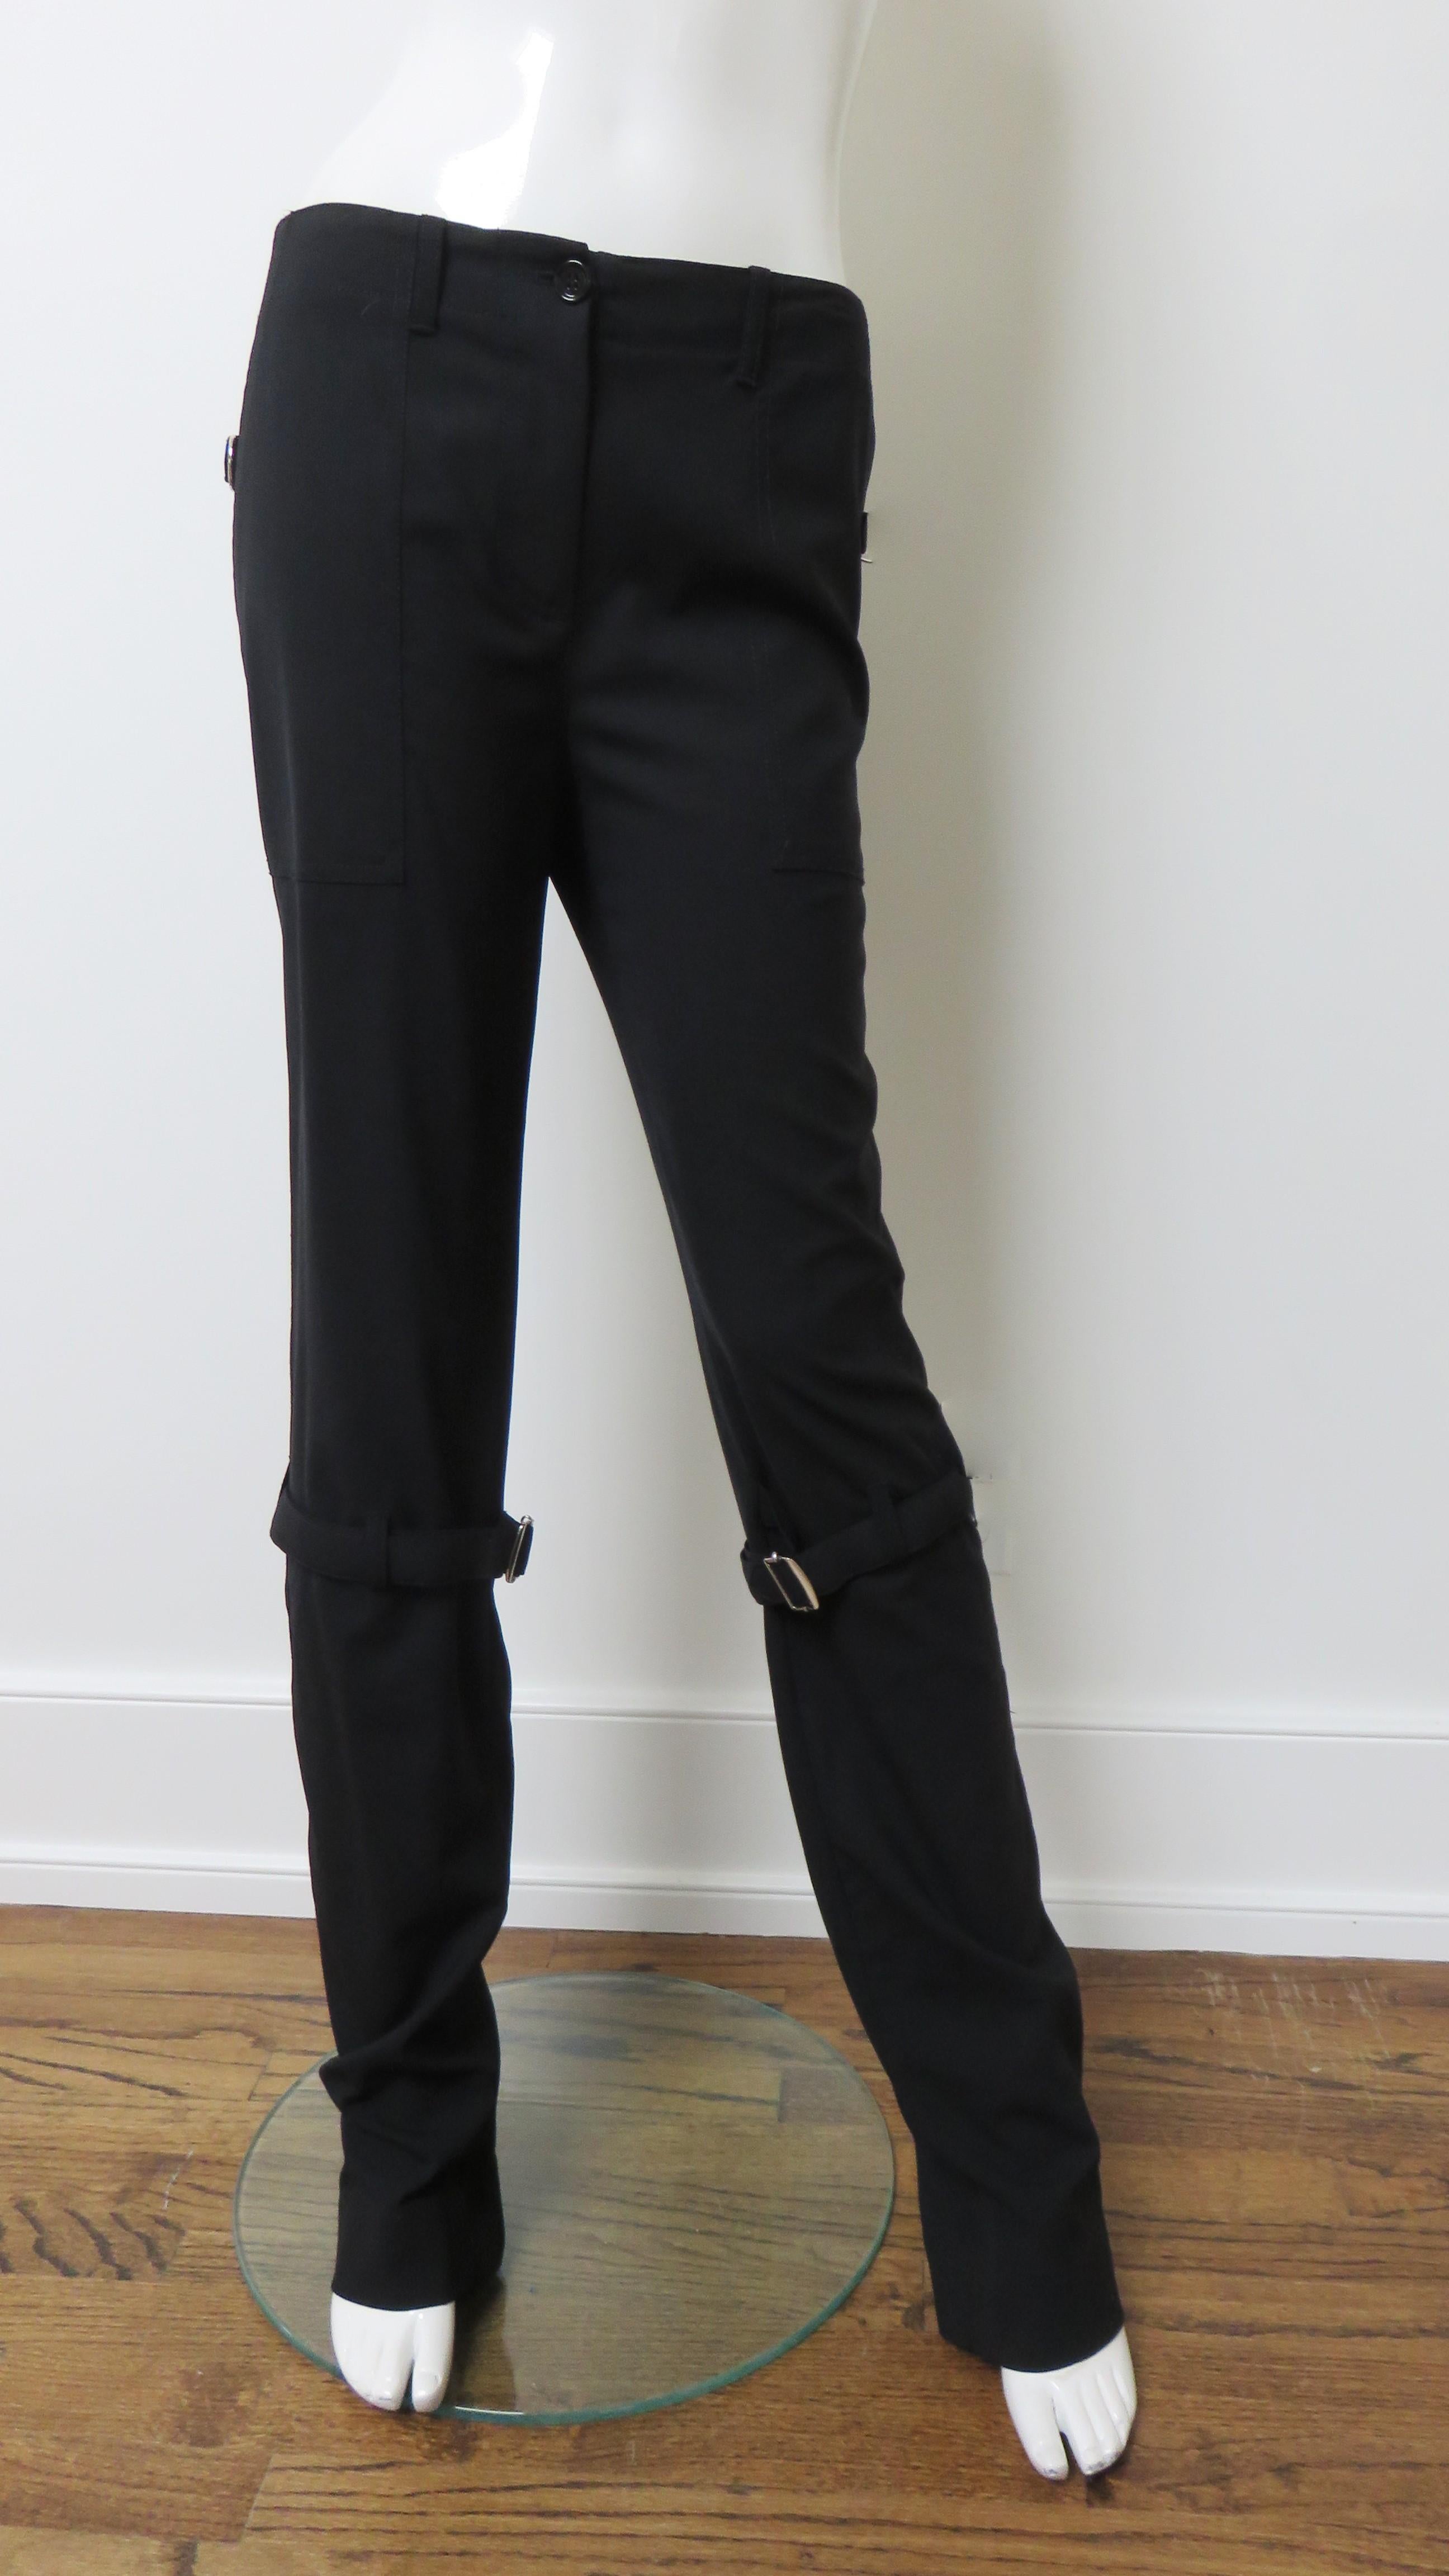 Women's Dolce & Gabbana Pants with Straps and Zippers For Sale